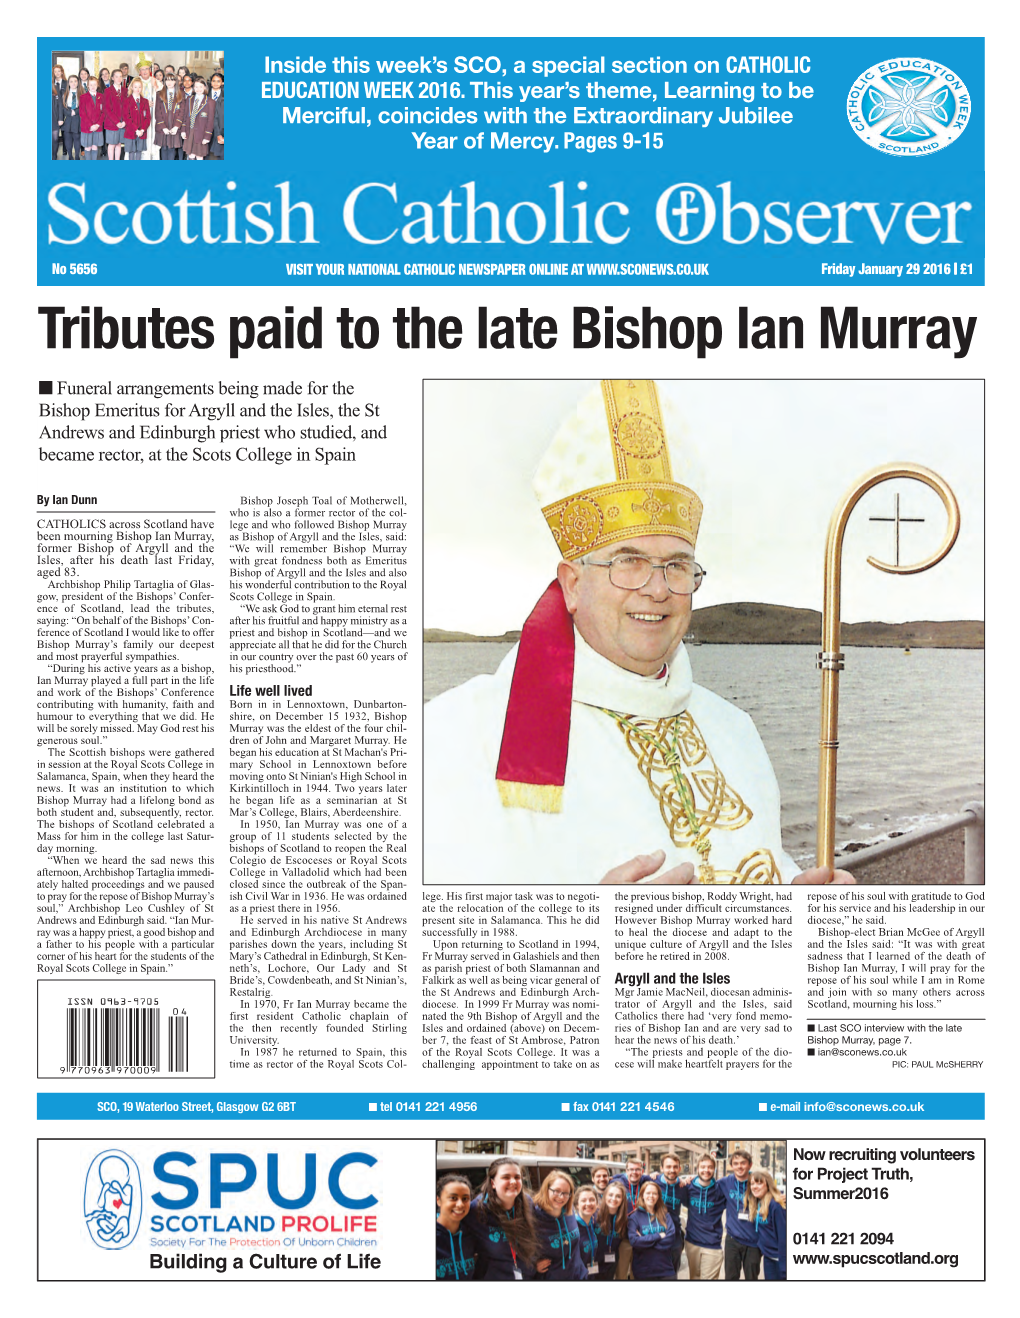 Tributes Paid to the Late Bishop Ian Murray